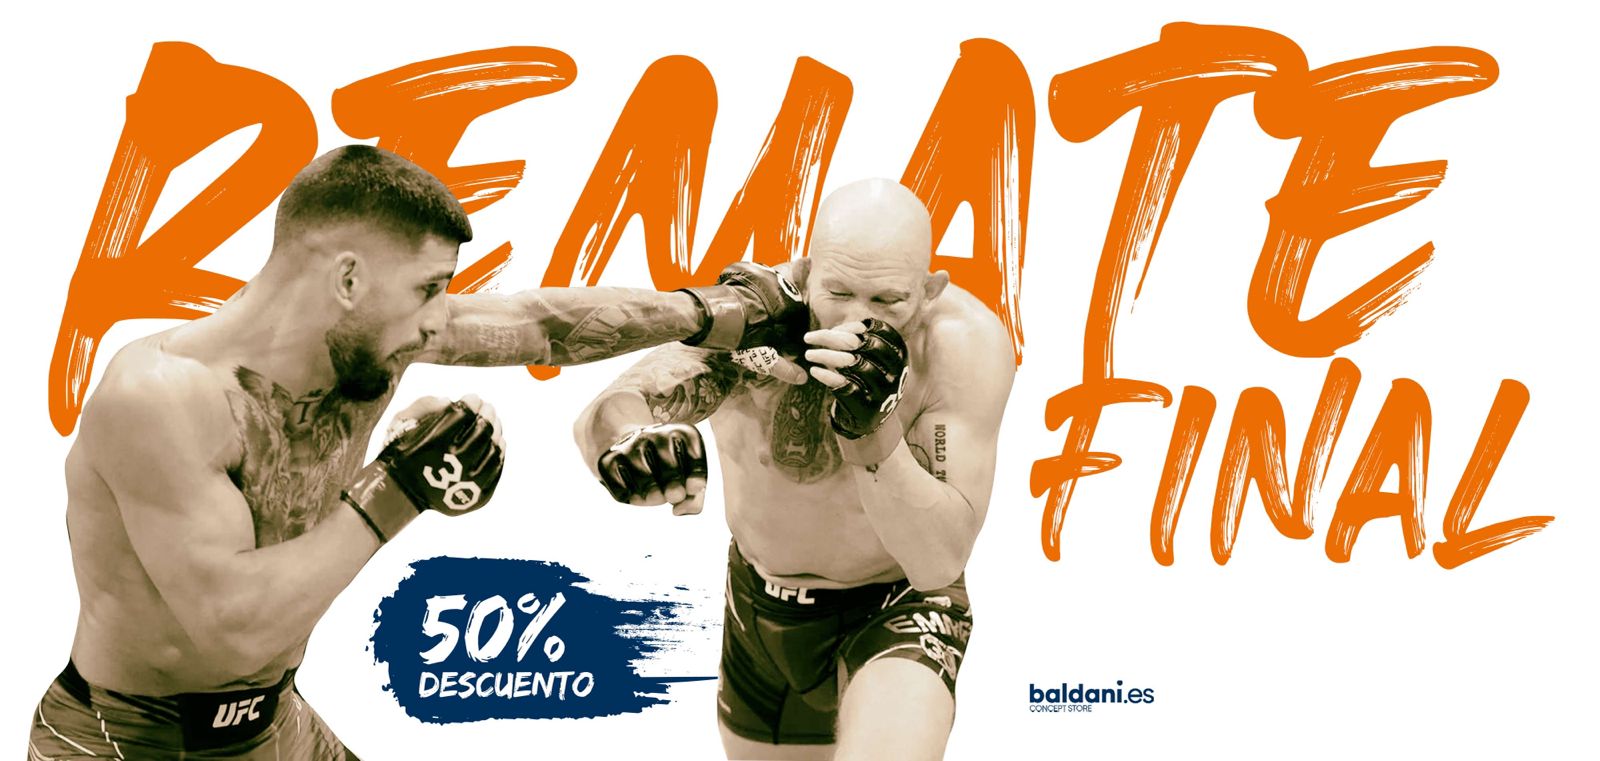 Remate Final 50%